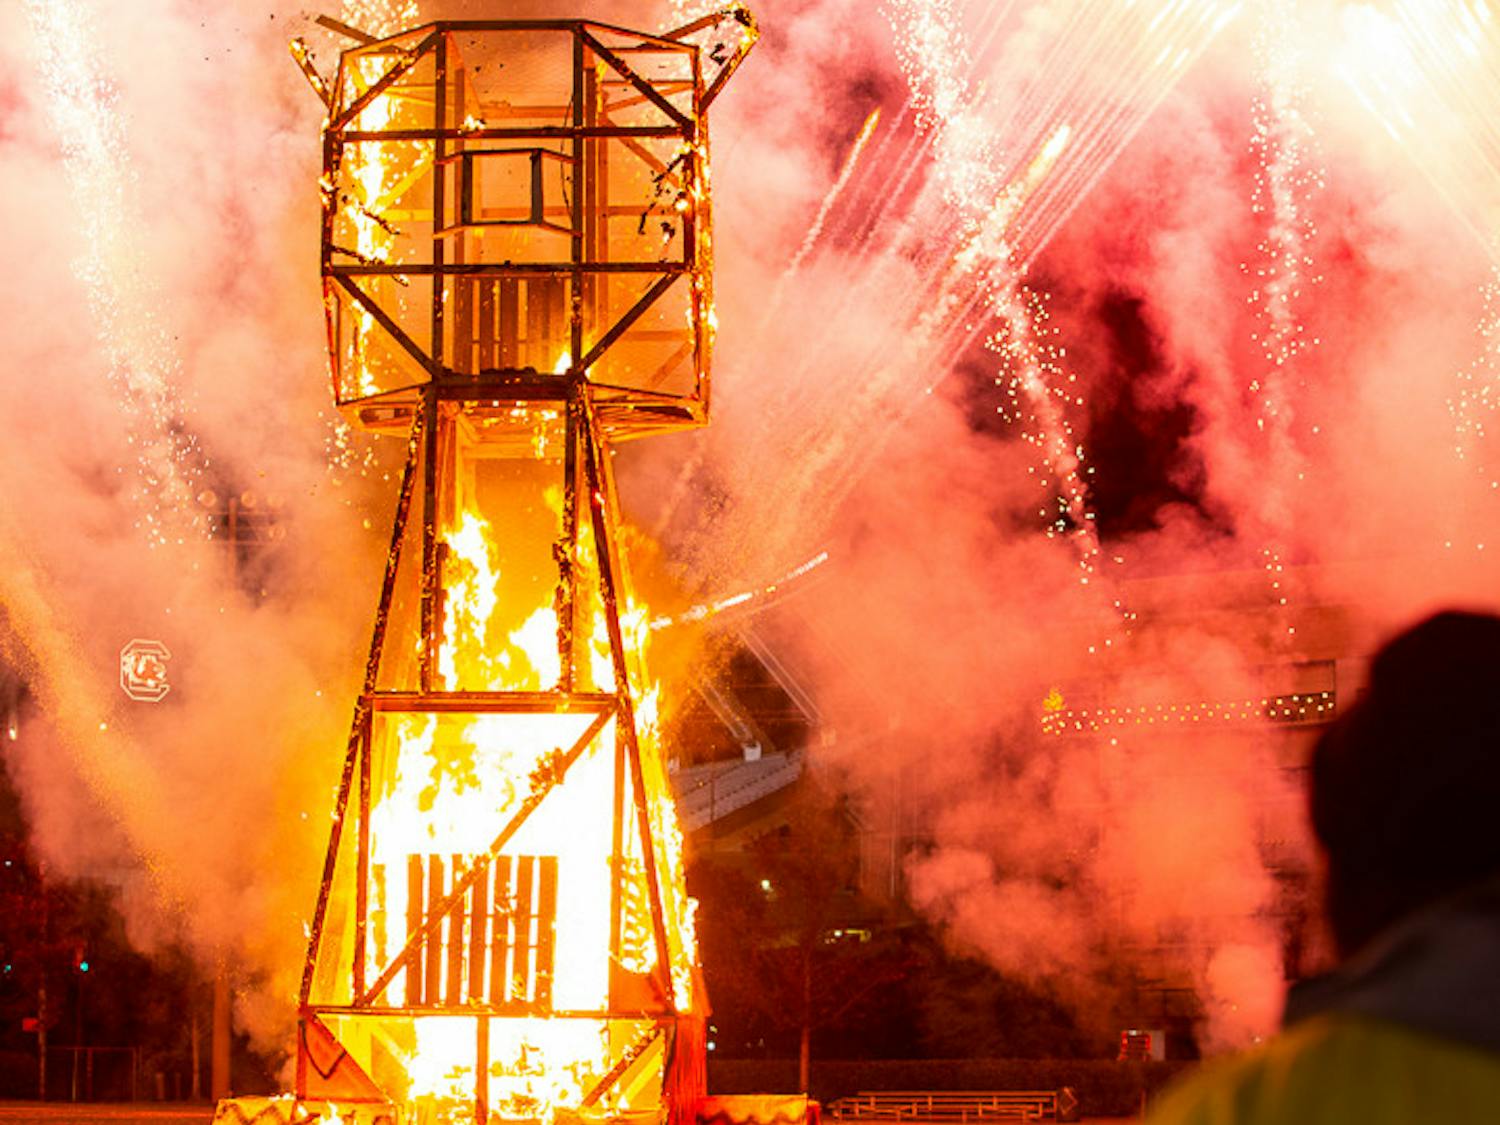 The Clemson Tiger statue was set ablaze during the Tiger Burning ceremony and within five minutes was nearly entirely burnt. The firework show rages on in the background as the crowd cheers.